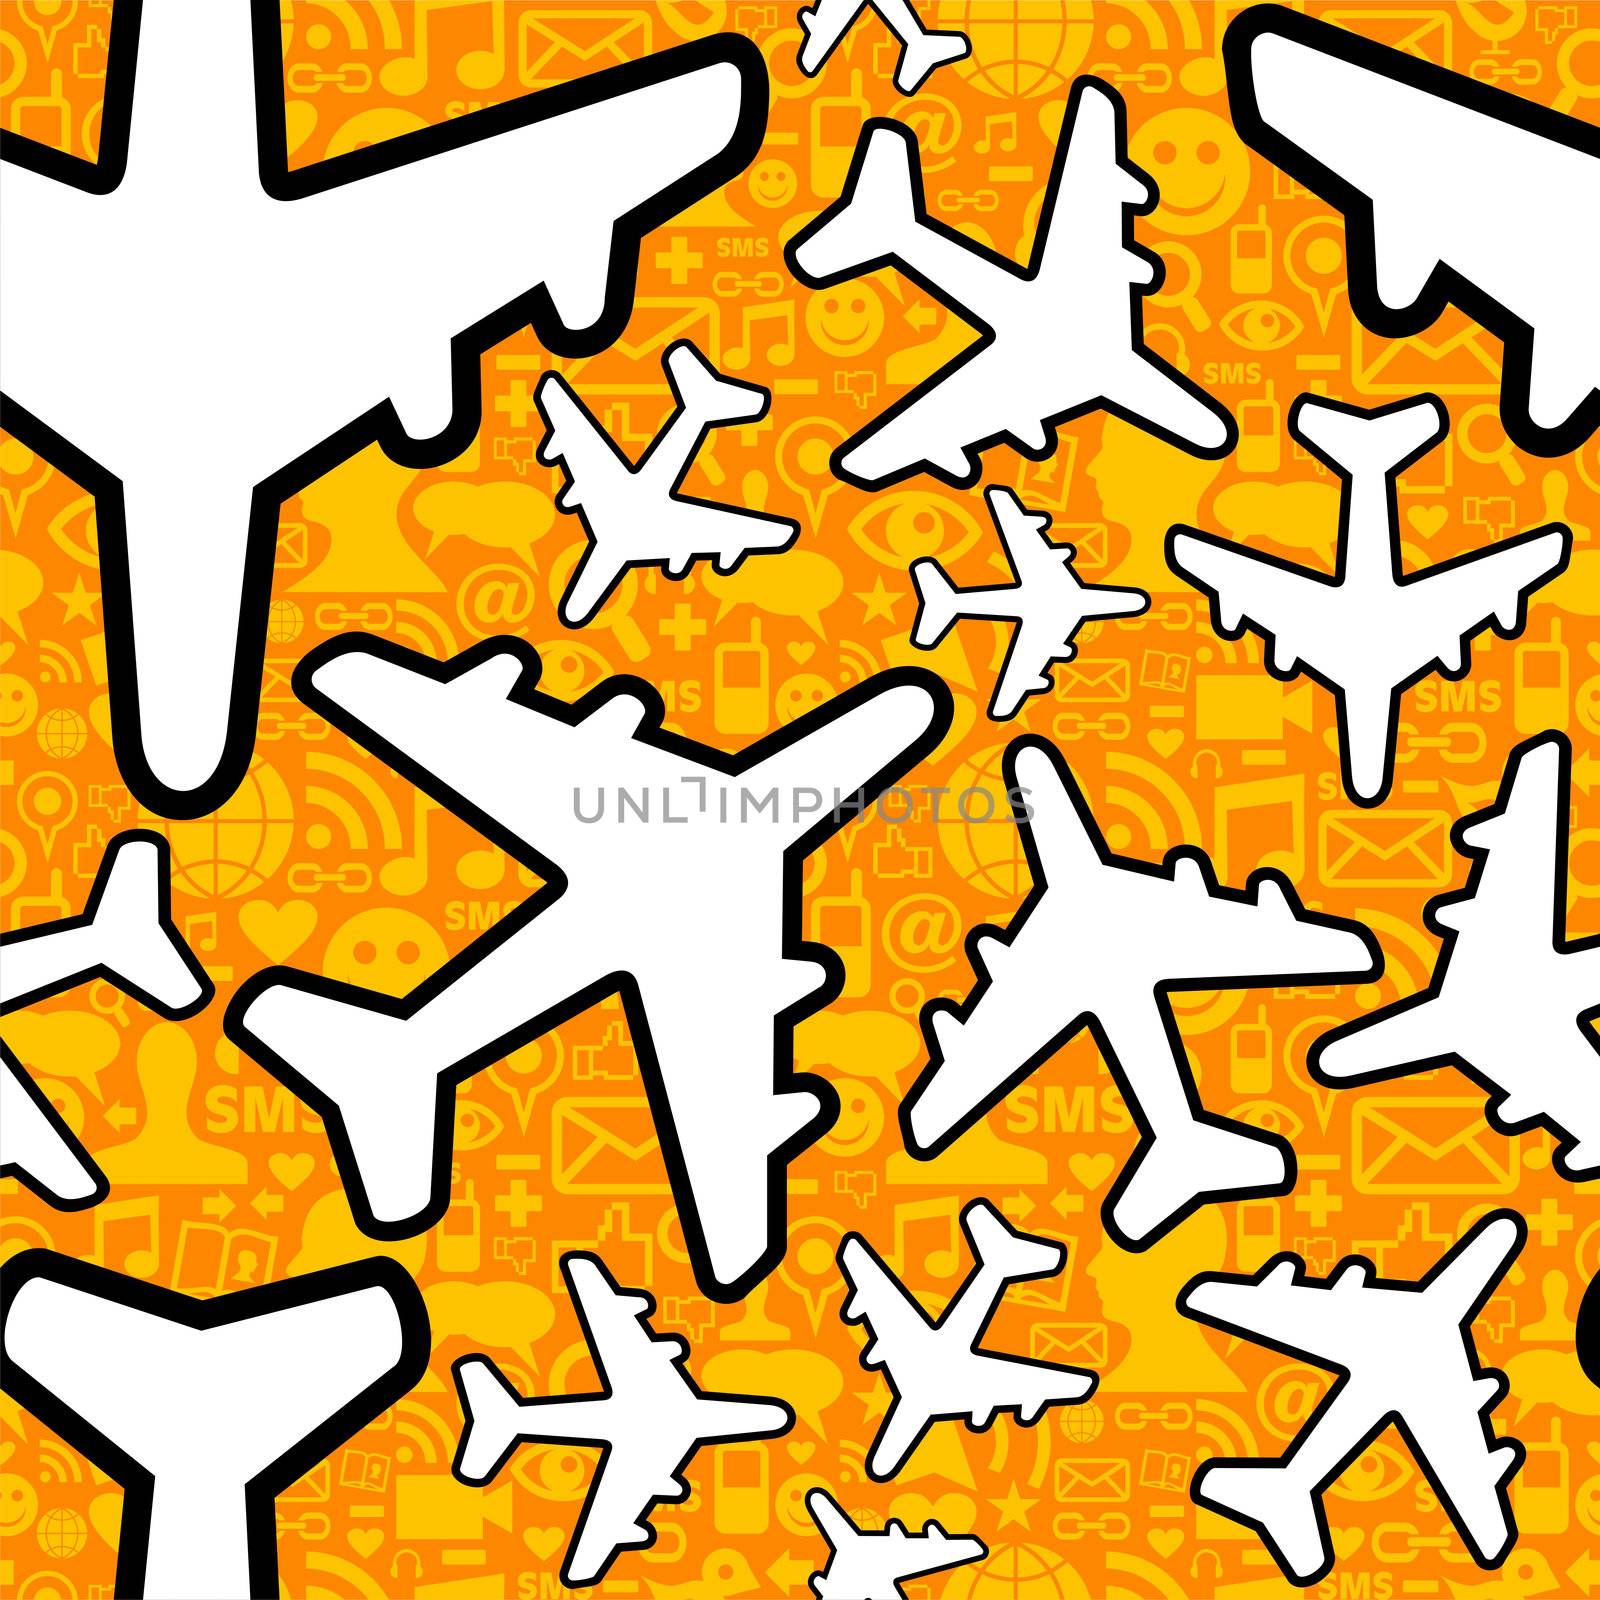 Social media networking in travel business. Airplane symbol pattern over icon set seamless pattern background. Vector file layered for easy manipulation and custom coloring.